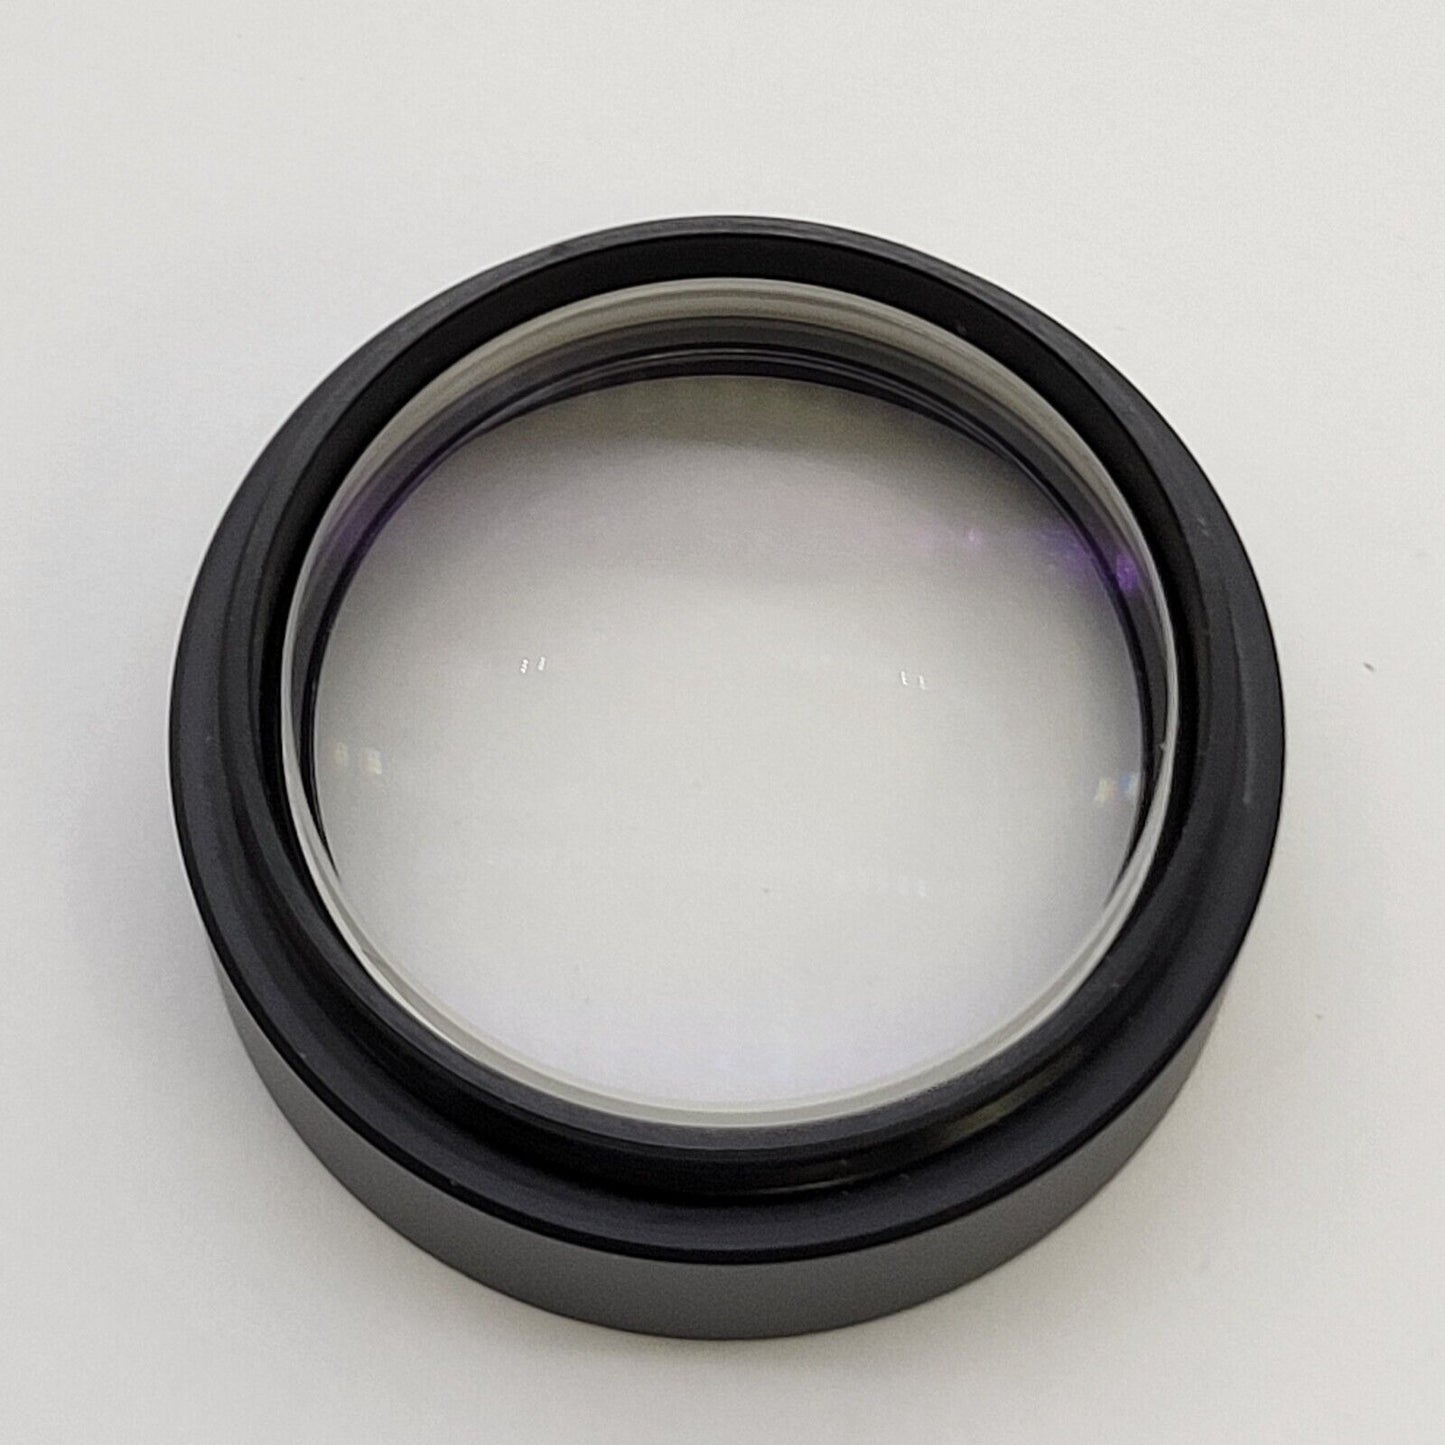 Leica Stereo Microscope Objective 0.5x WD 200mm Lens 10446318 S-Series - microscopemarketplace